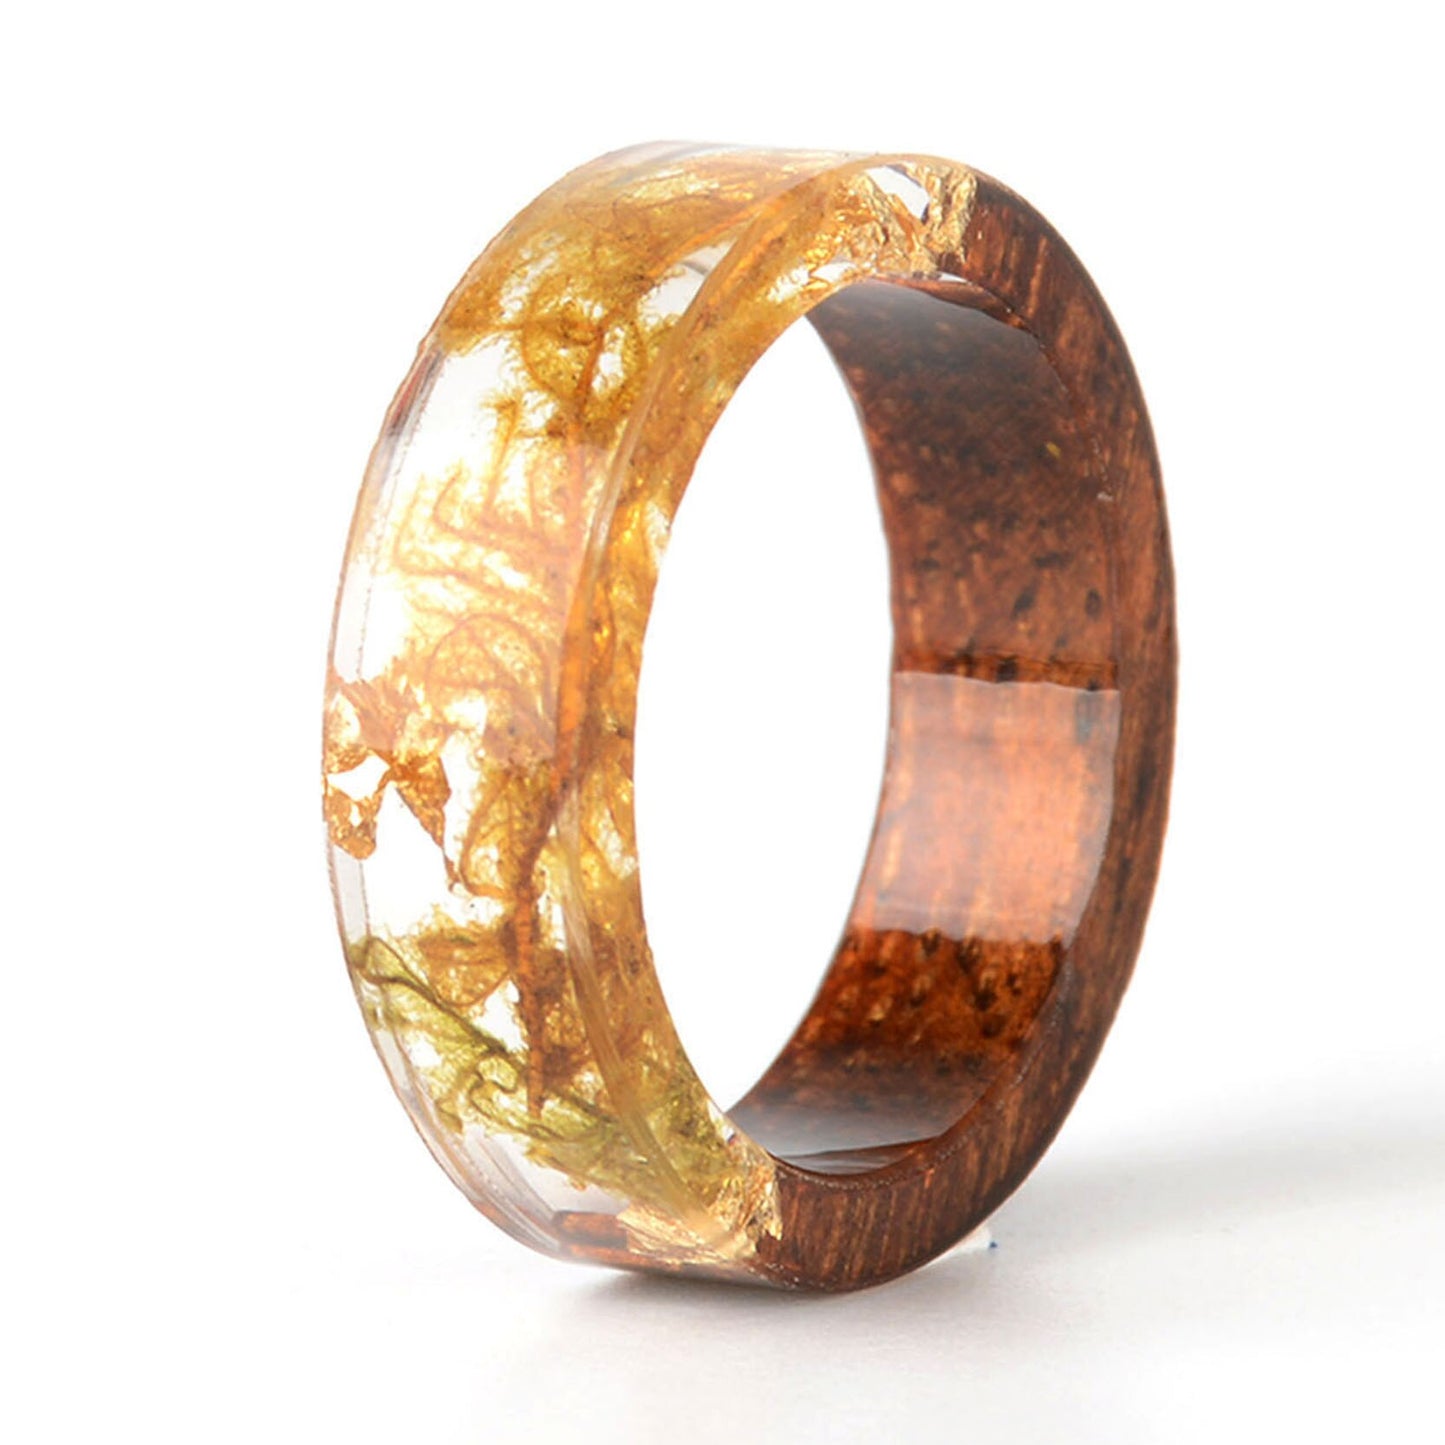 Handmade DIY romantic dry flower Real wood resin ring gold / silver paper inside ring women wedding party ring gifts for the lover